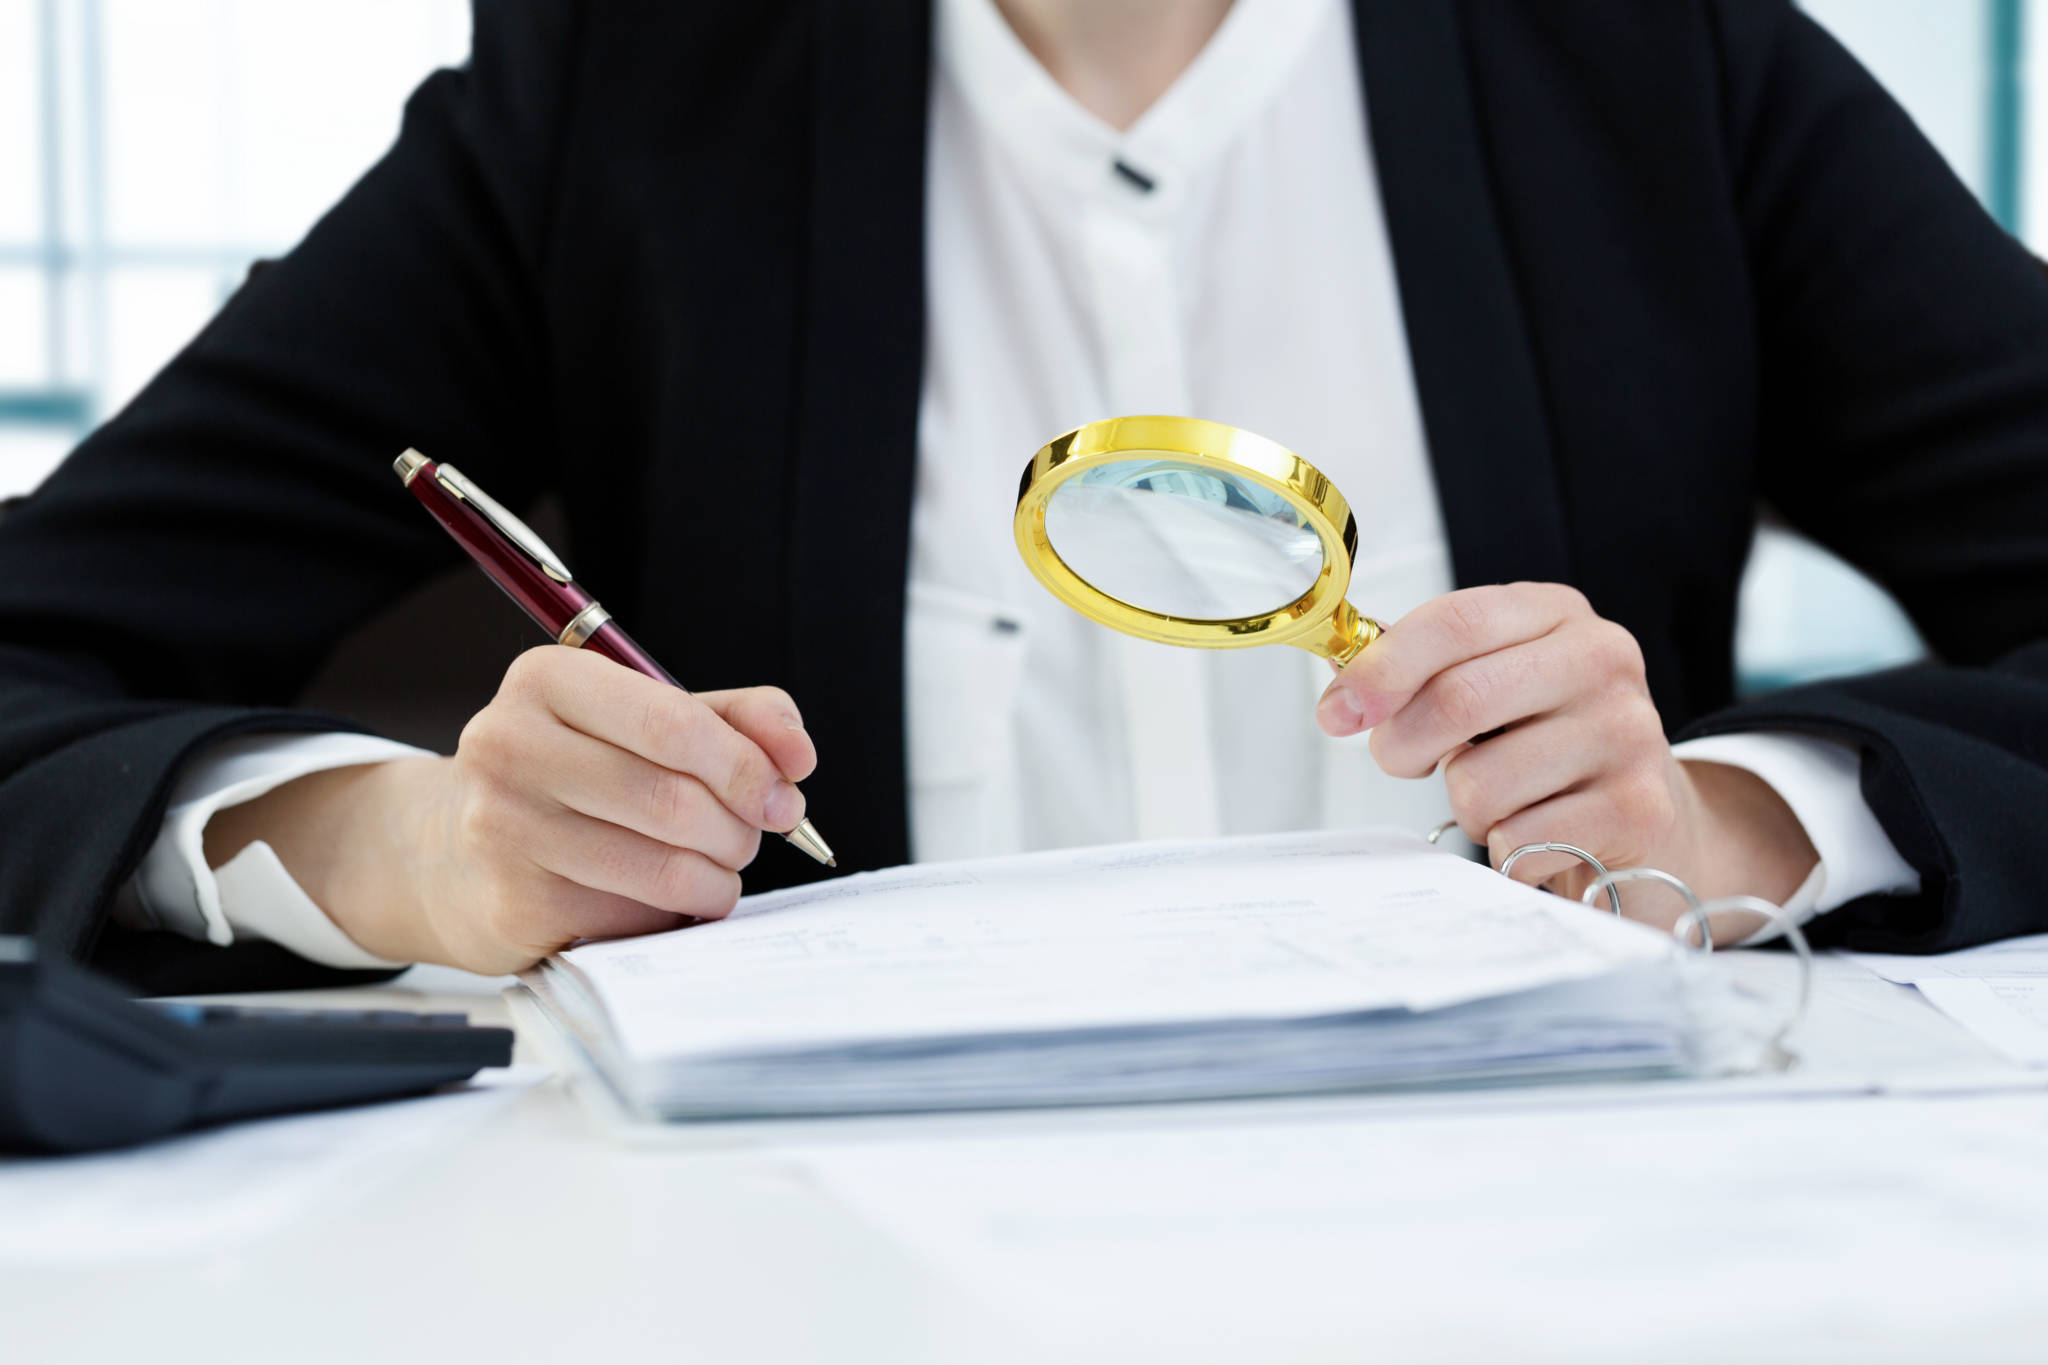 internal audit concept - woman with magnifying glass inspecting documents